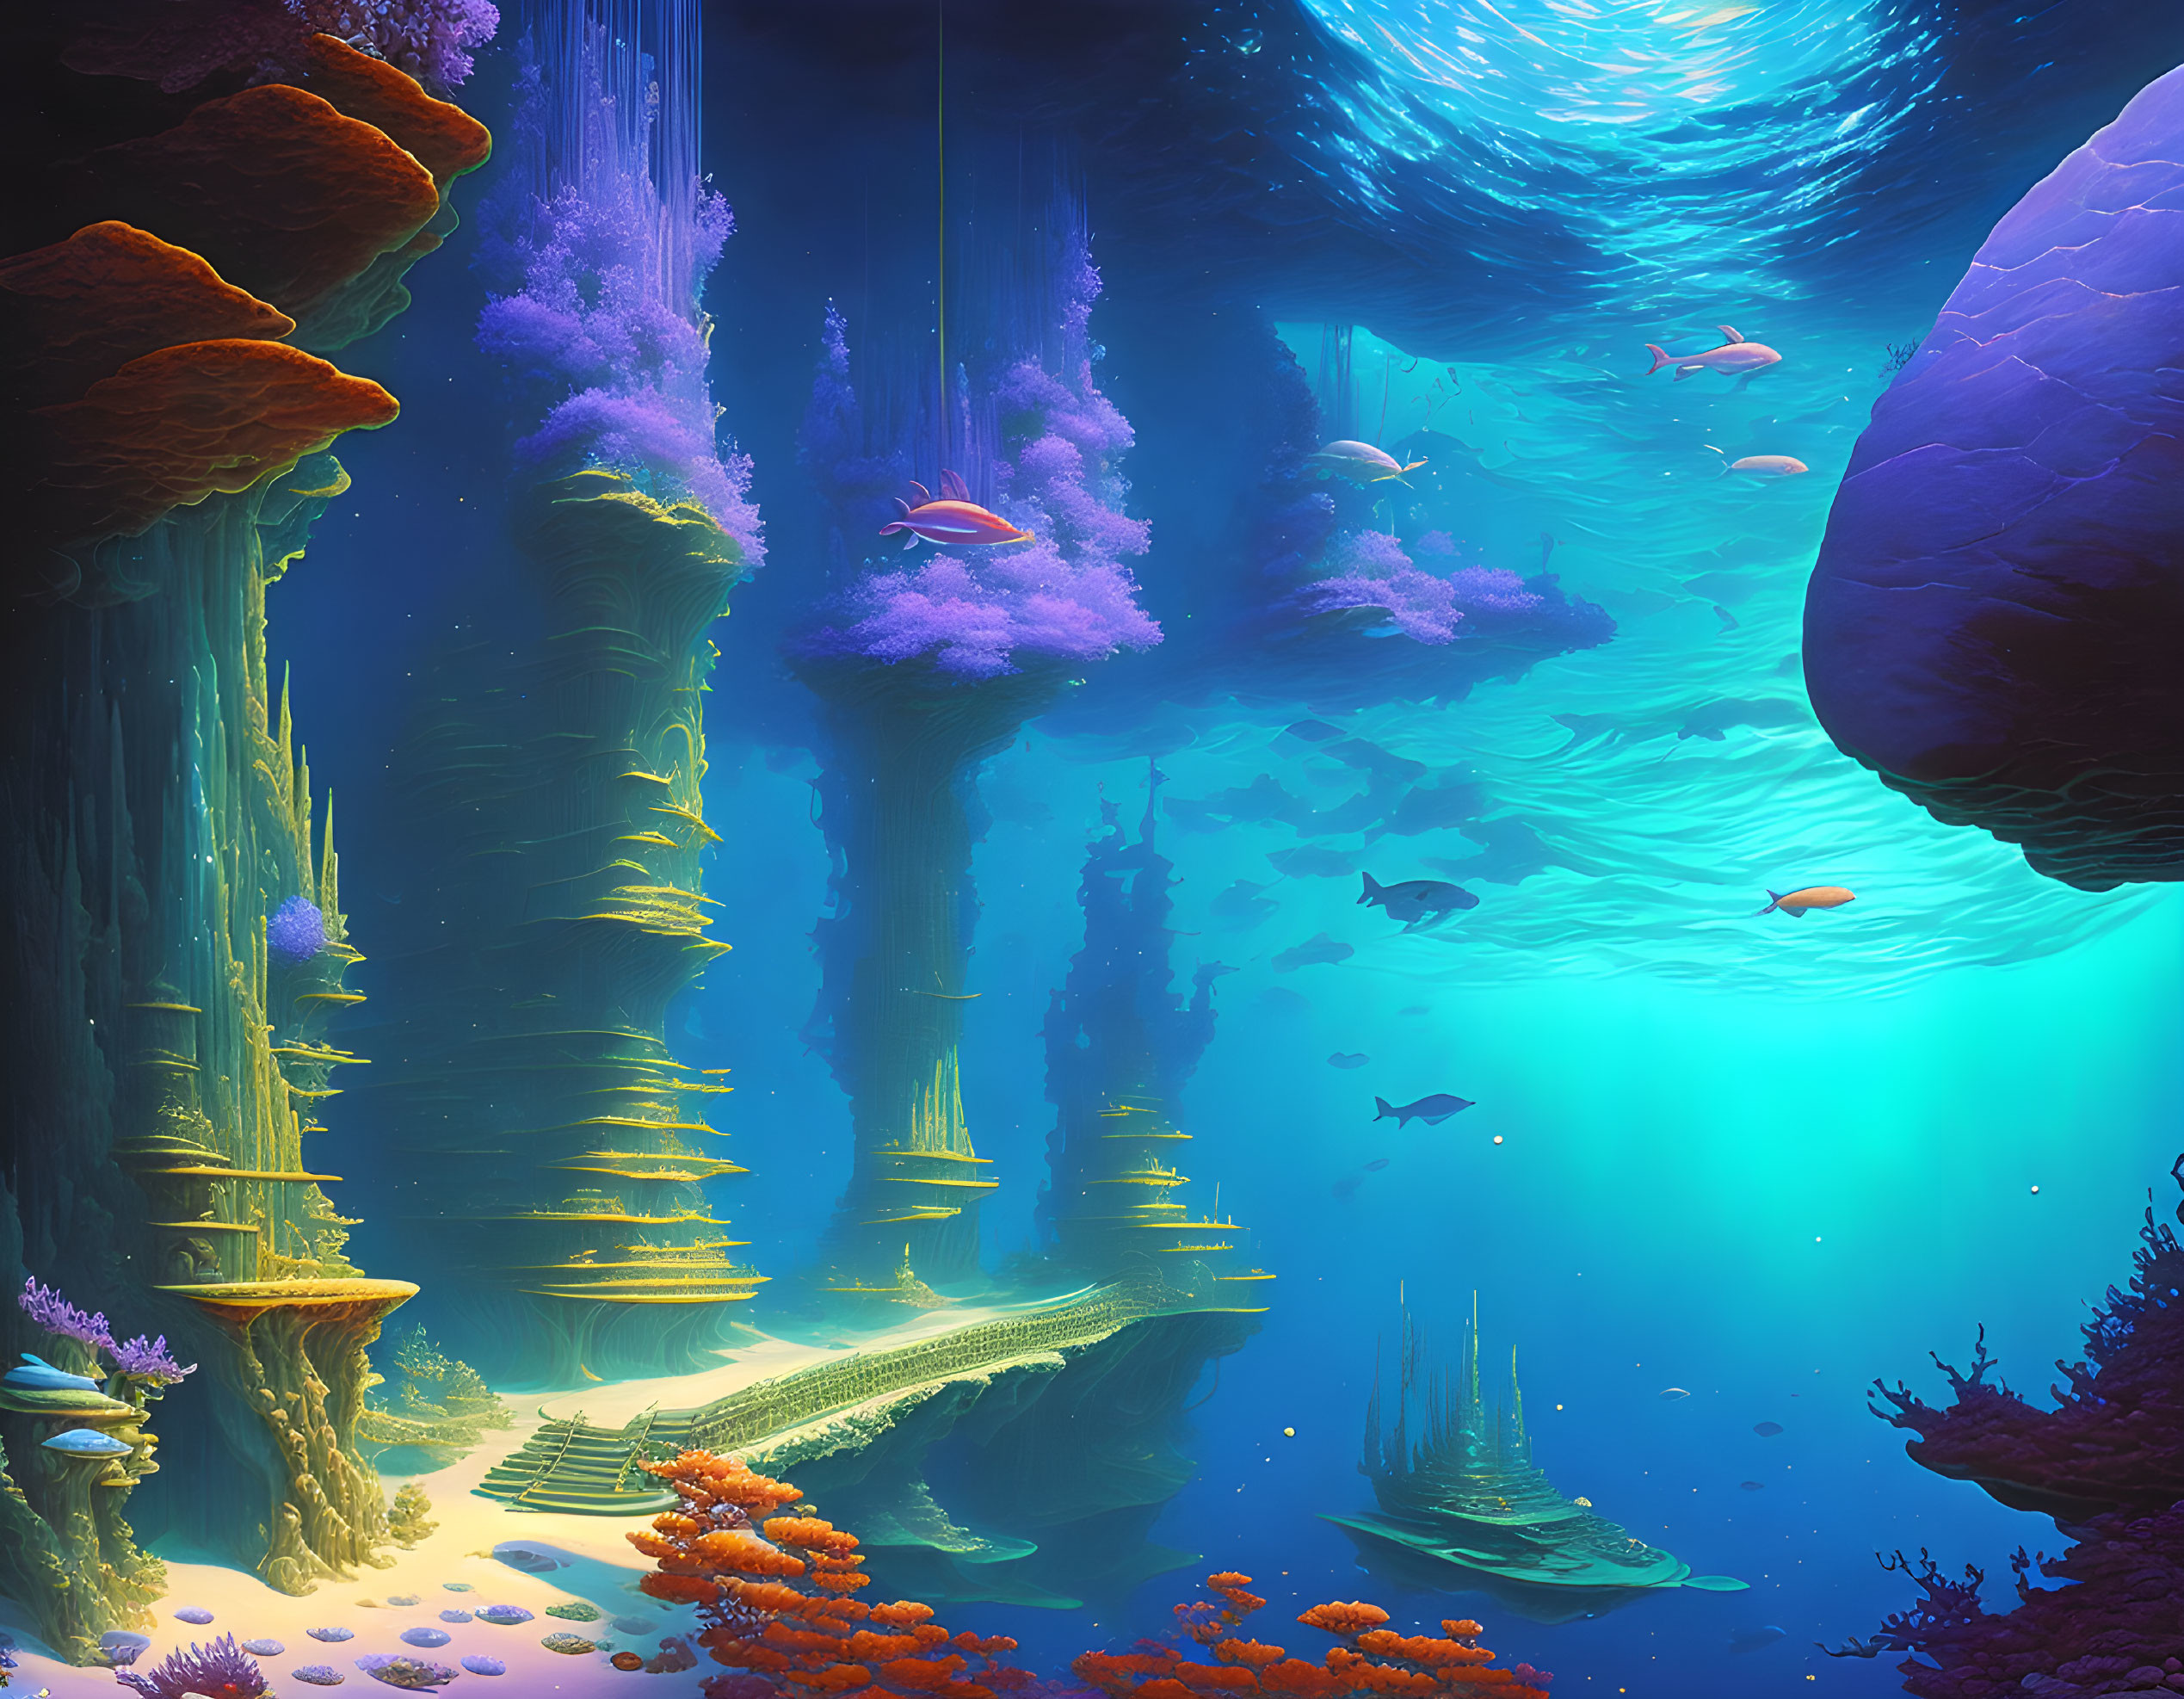 Vibrant coral structures and fish in underwater ruins with ancient pillars.